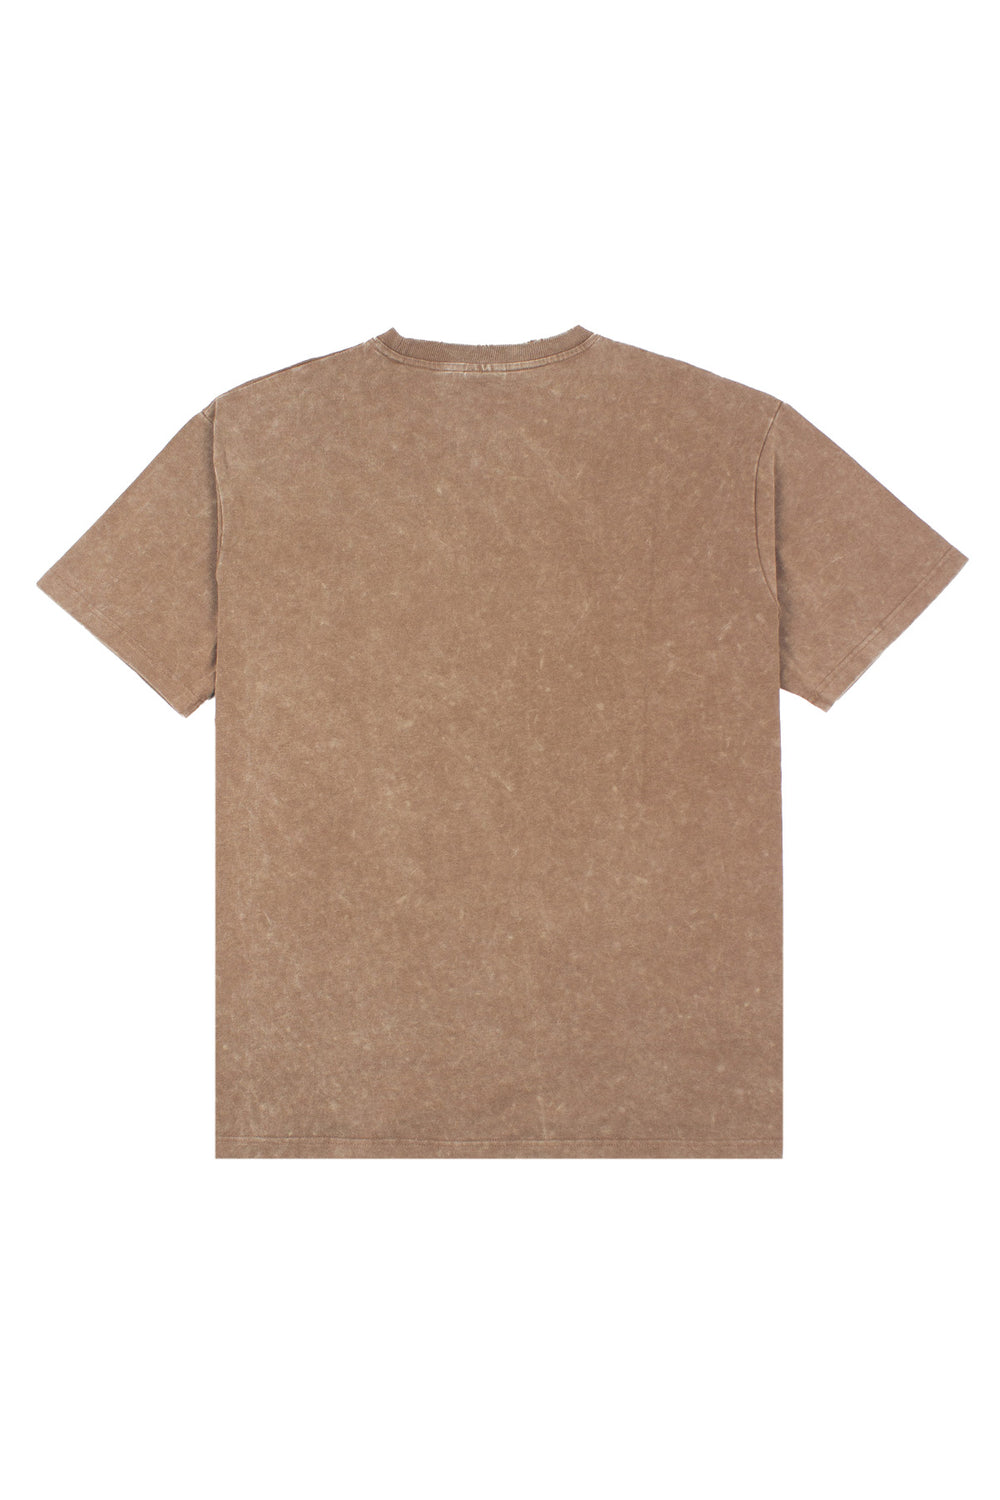 PMC | Production Logo Stone Washed Tee Brown